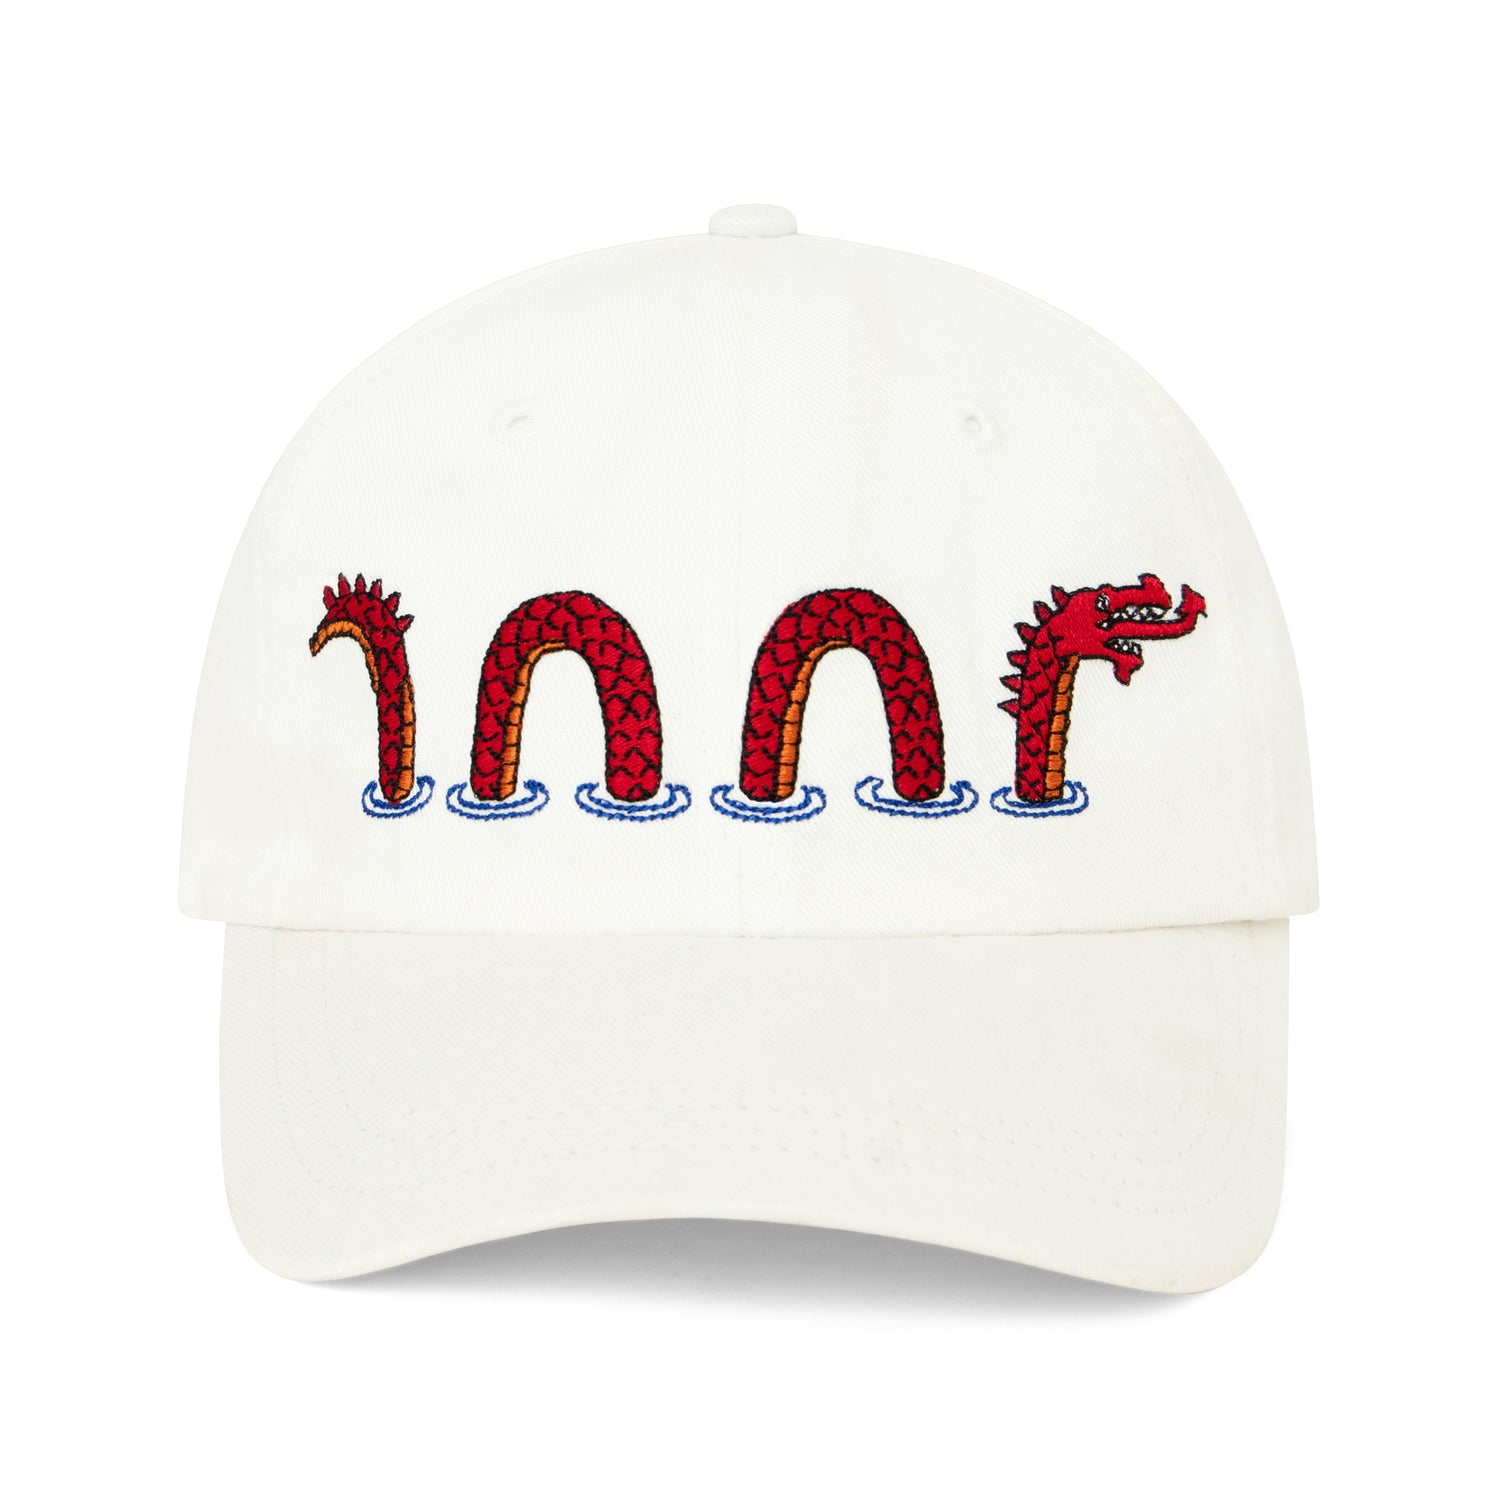  White hat embroidered with red Loch Ness Monster motif. 